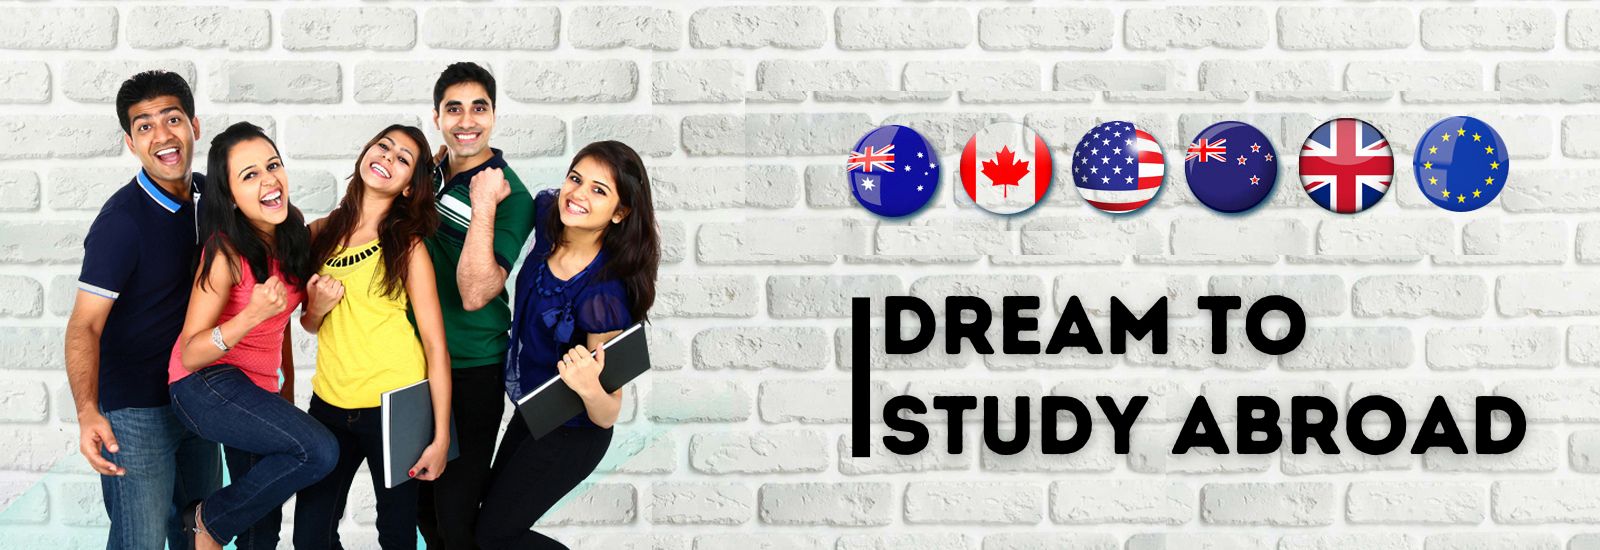 DREAM TO STUDY ABROAD (1)